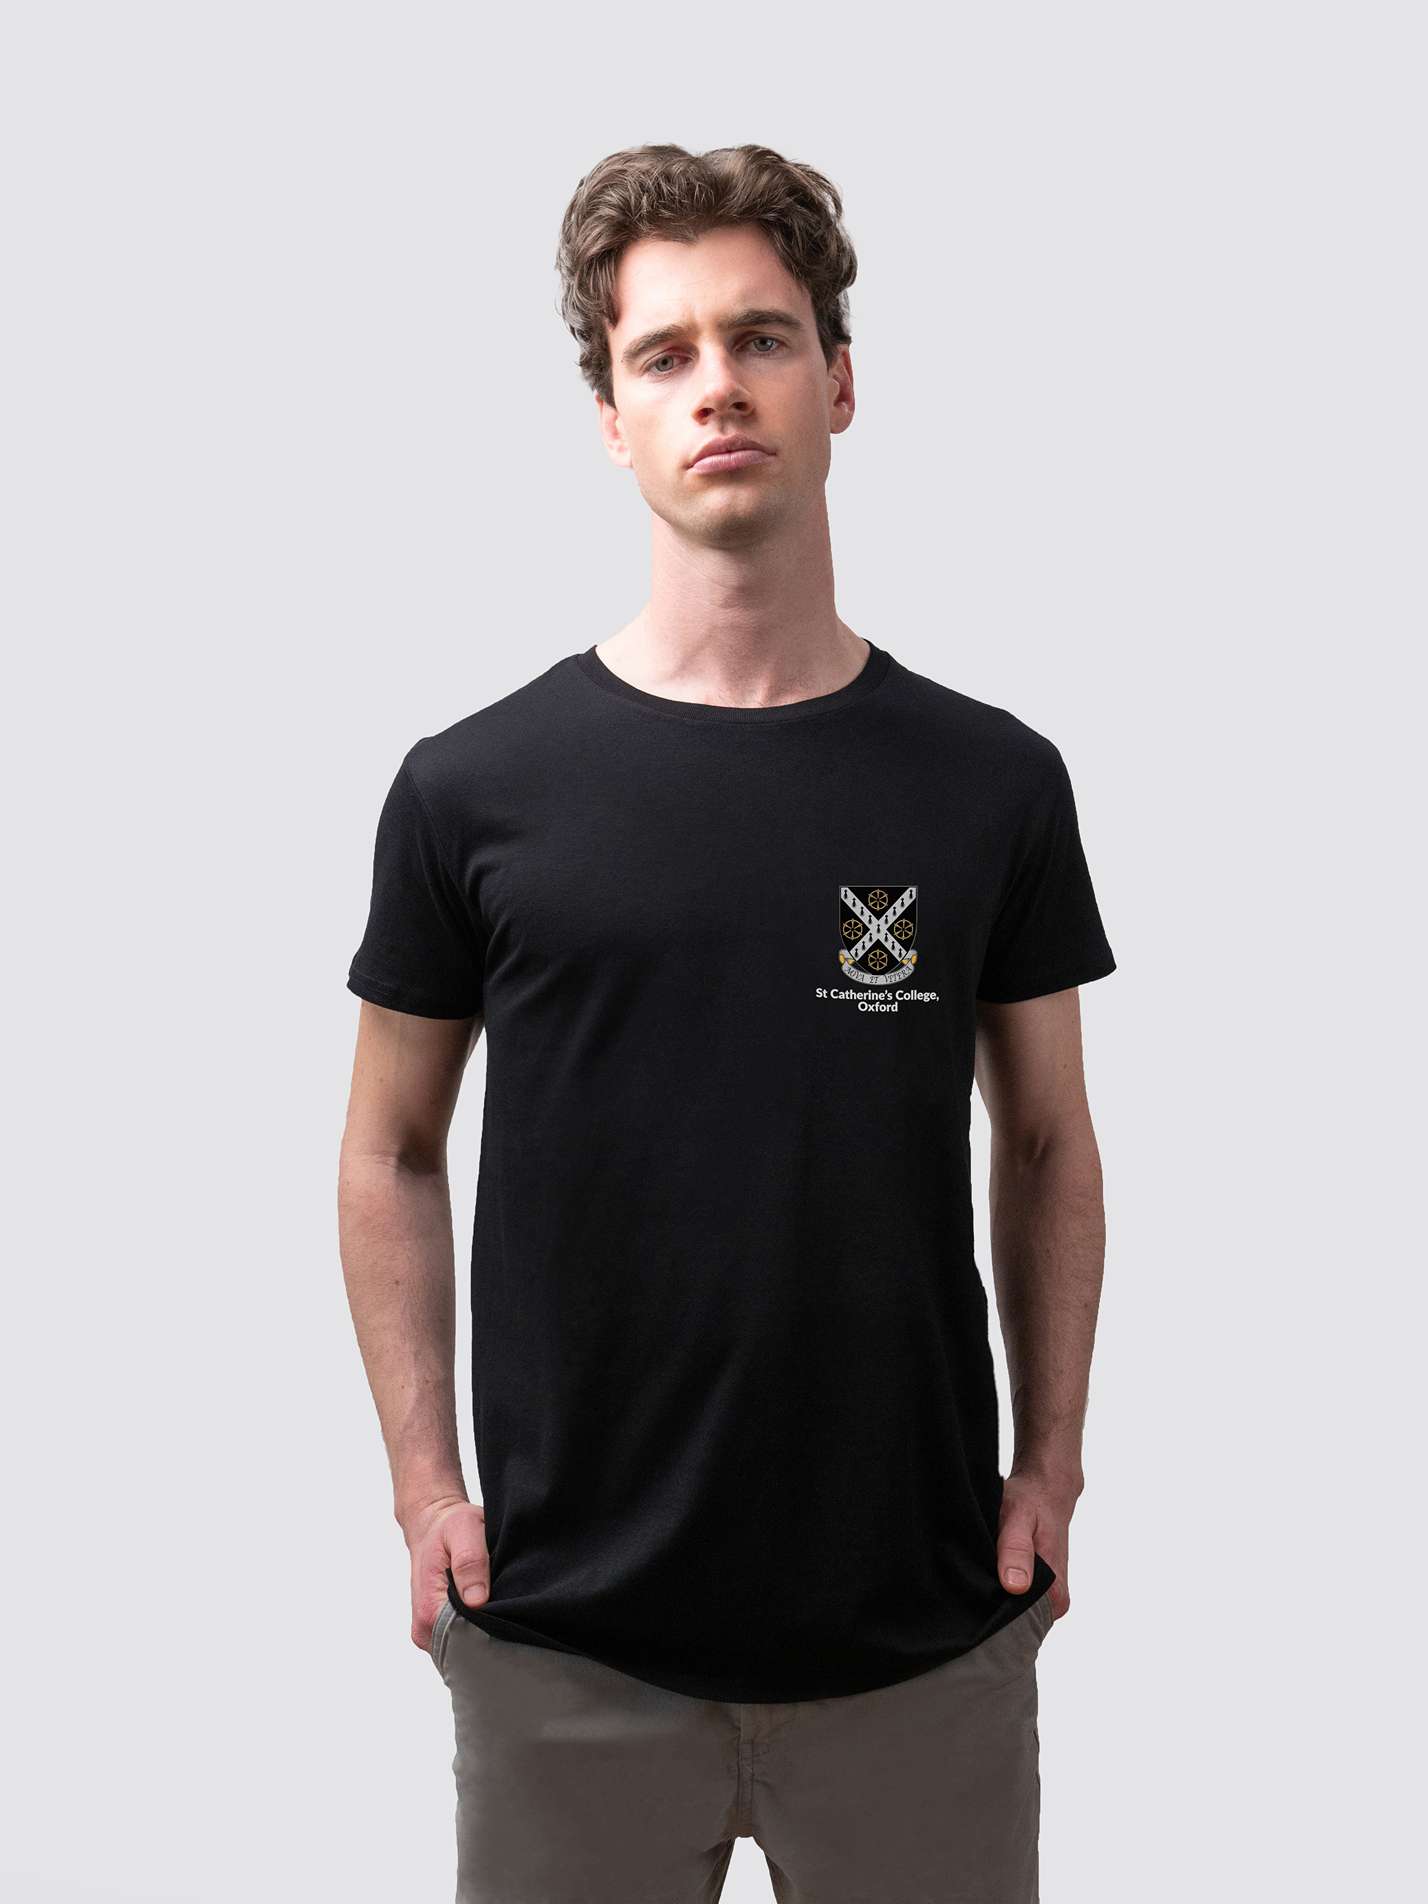 Sustainable St Catherine's College t-shirt, made from organic cotton